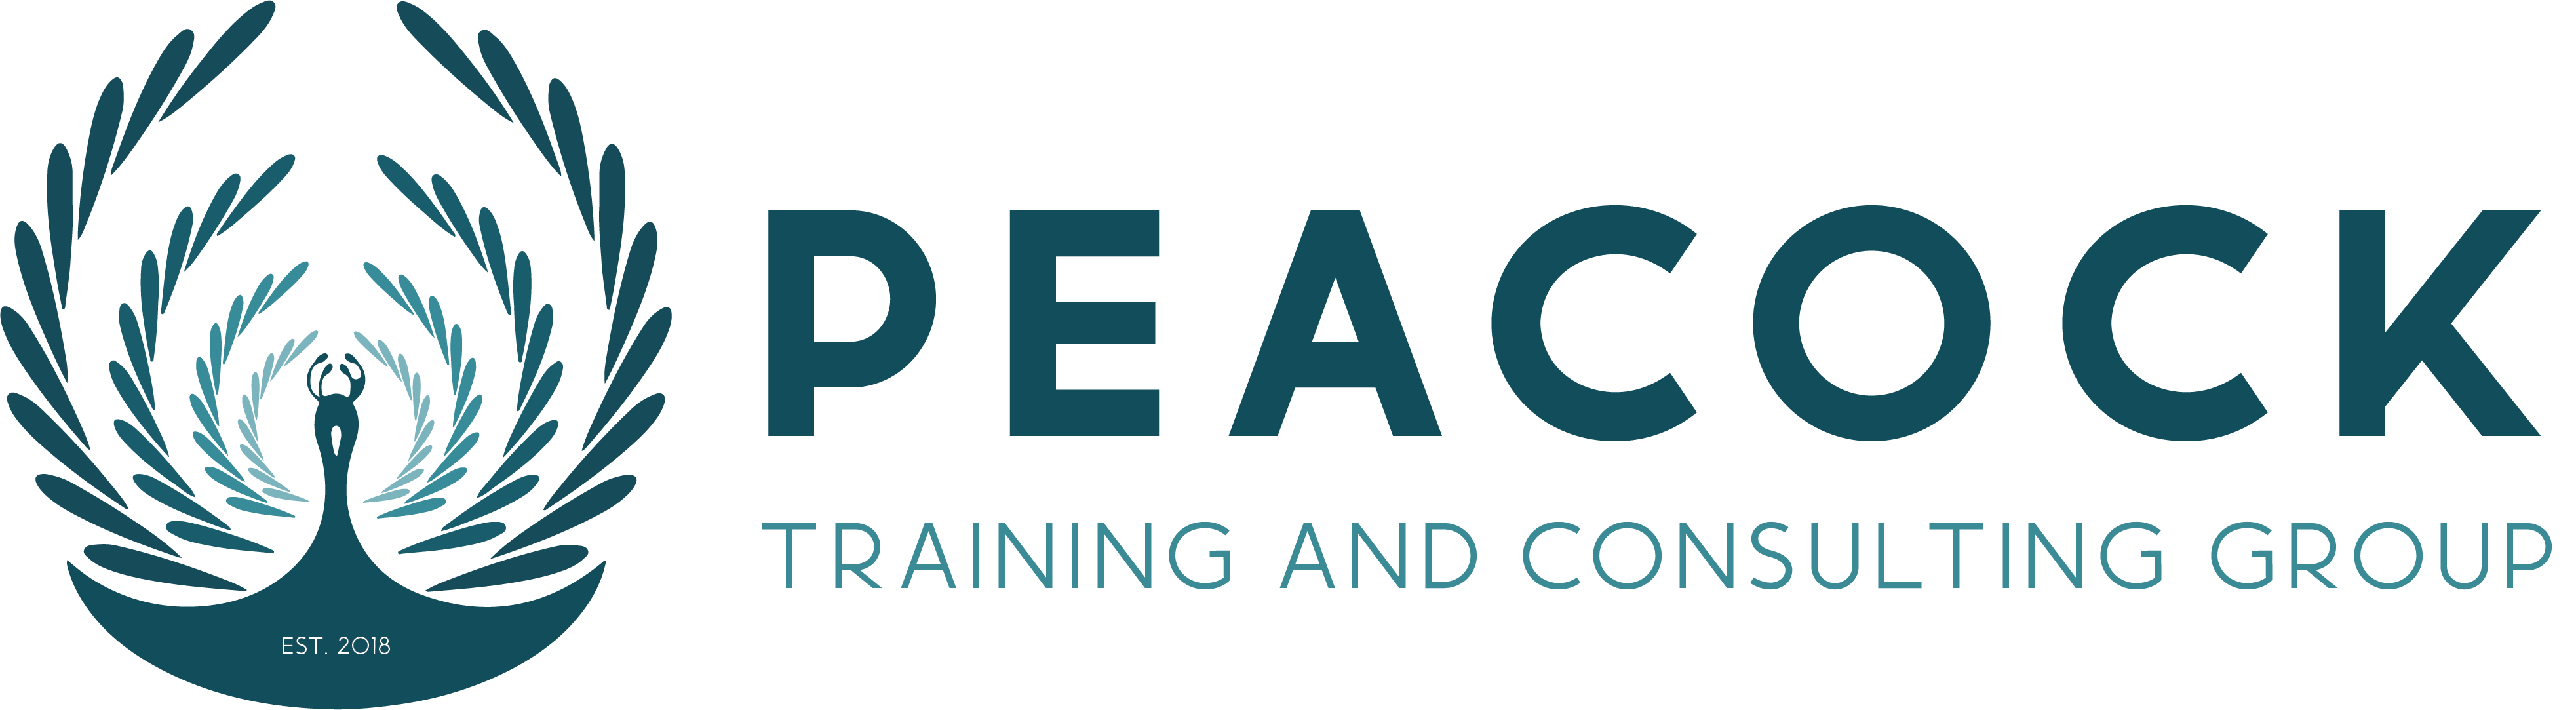 Peacock Training & Consulting